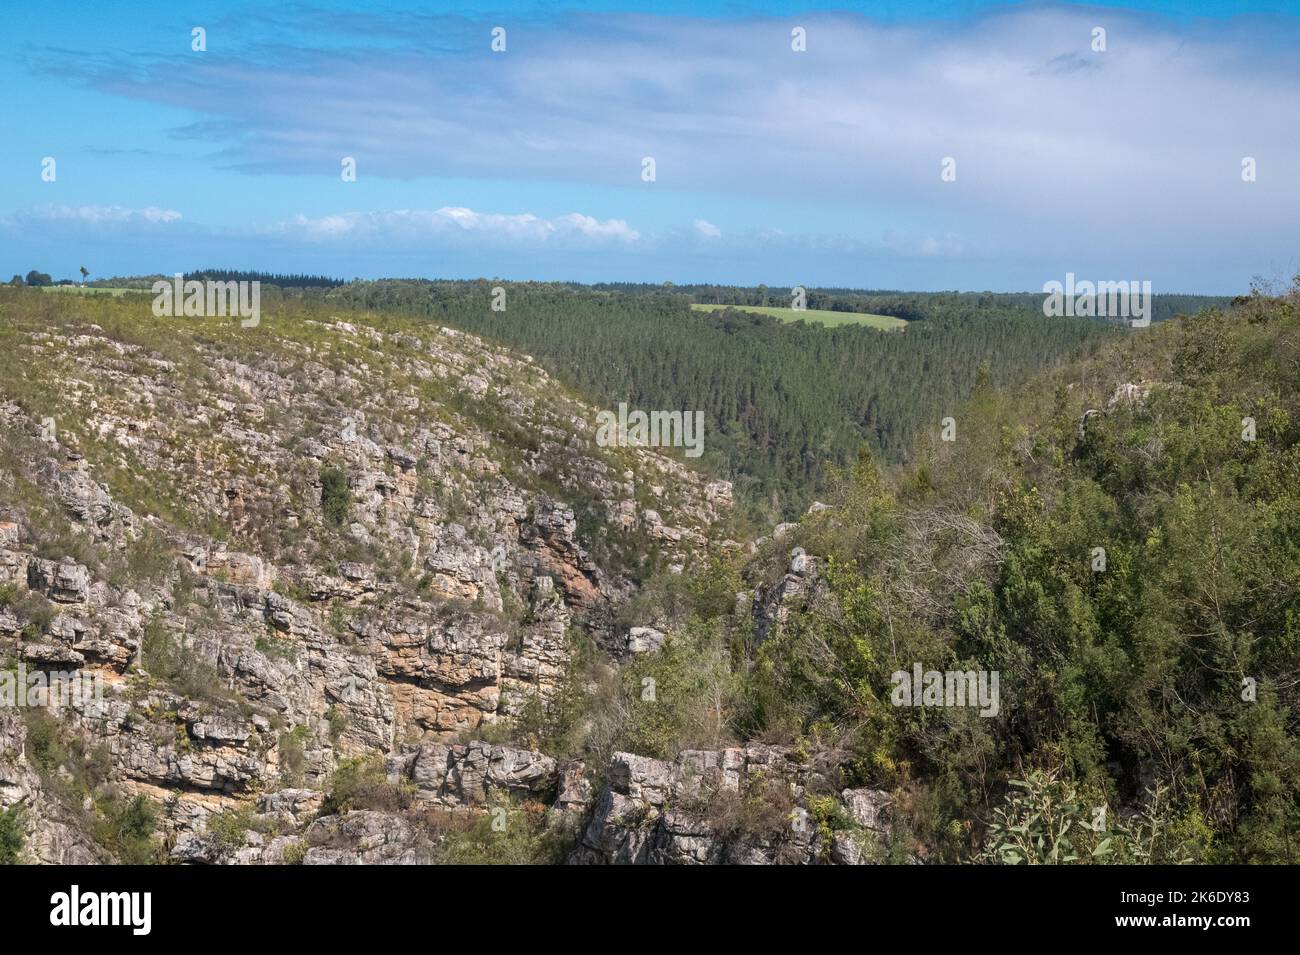 Panoramic view from a mountain top of a forest area with a green clearing surrounded by trees on a beautiful sunny day. Natural landscape Stock Photo